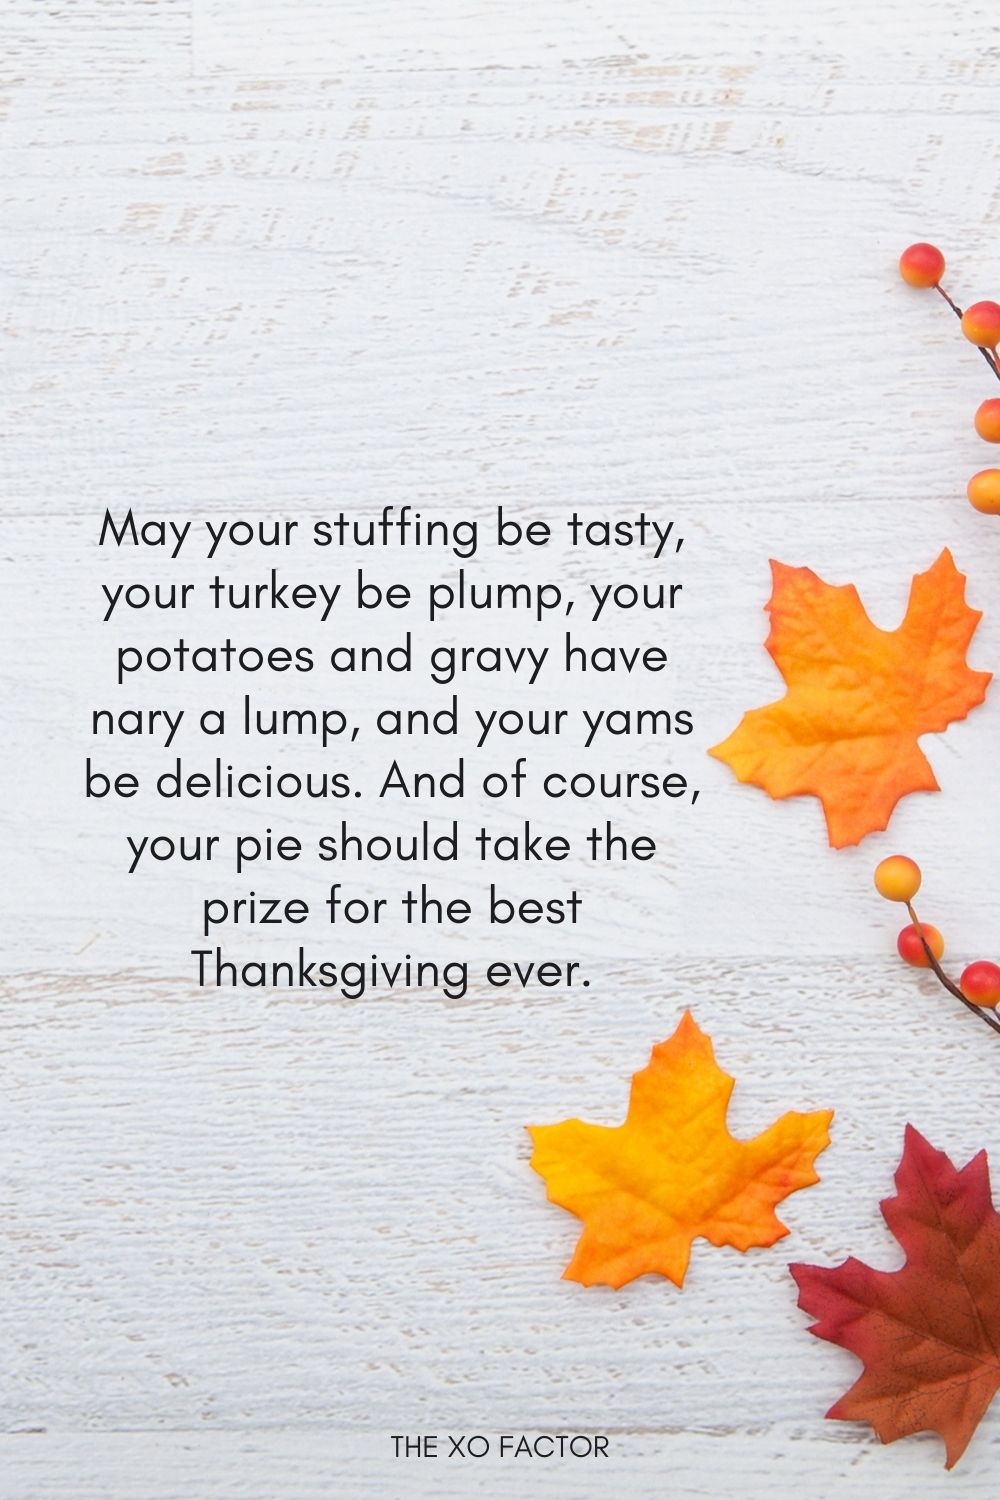 May your stuffing be tasty, your turkey be plump, your potatoes and gravy have nary a lump, and your yams be delicious. And of course, your pie should take the prize for the best Thanksgiving ever.